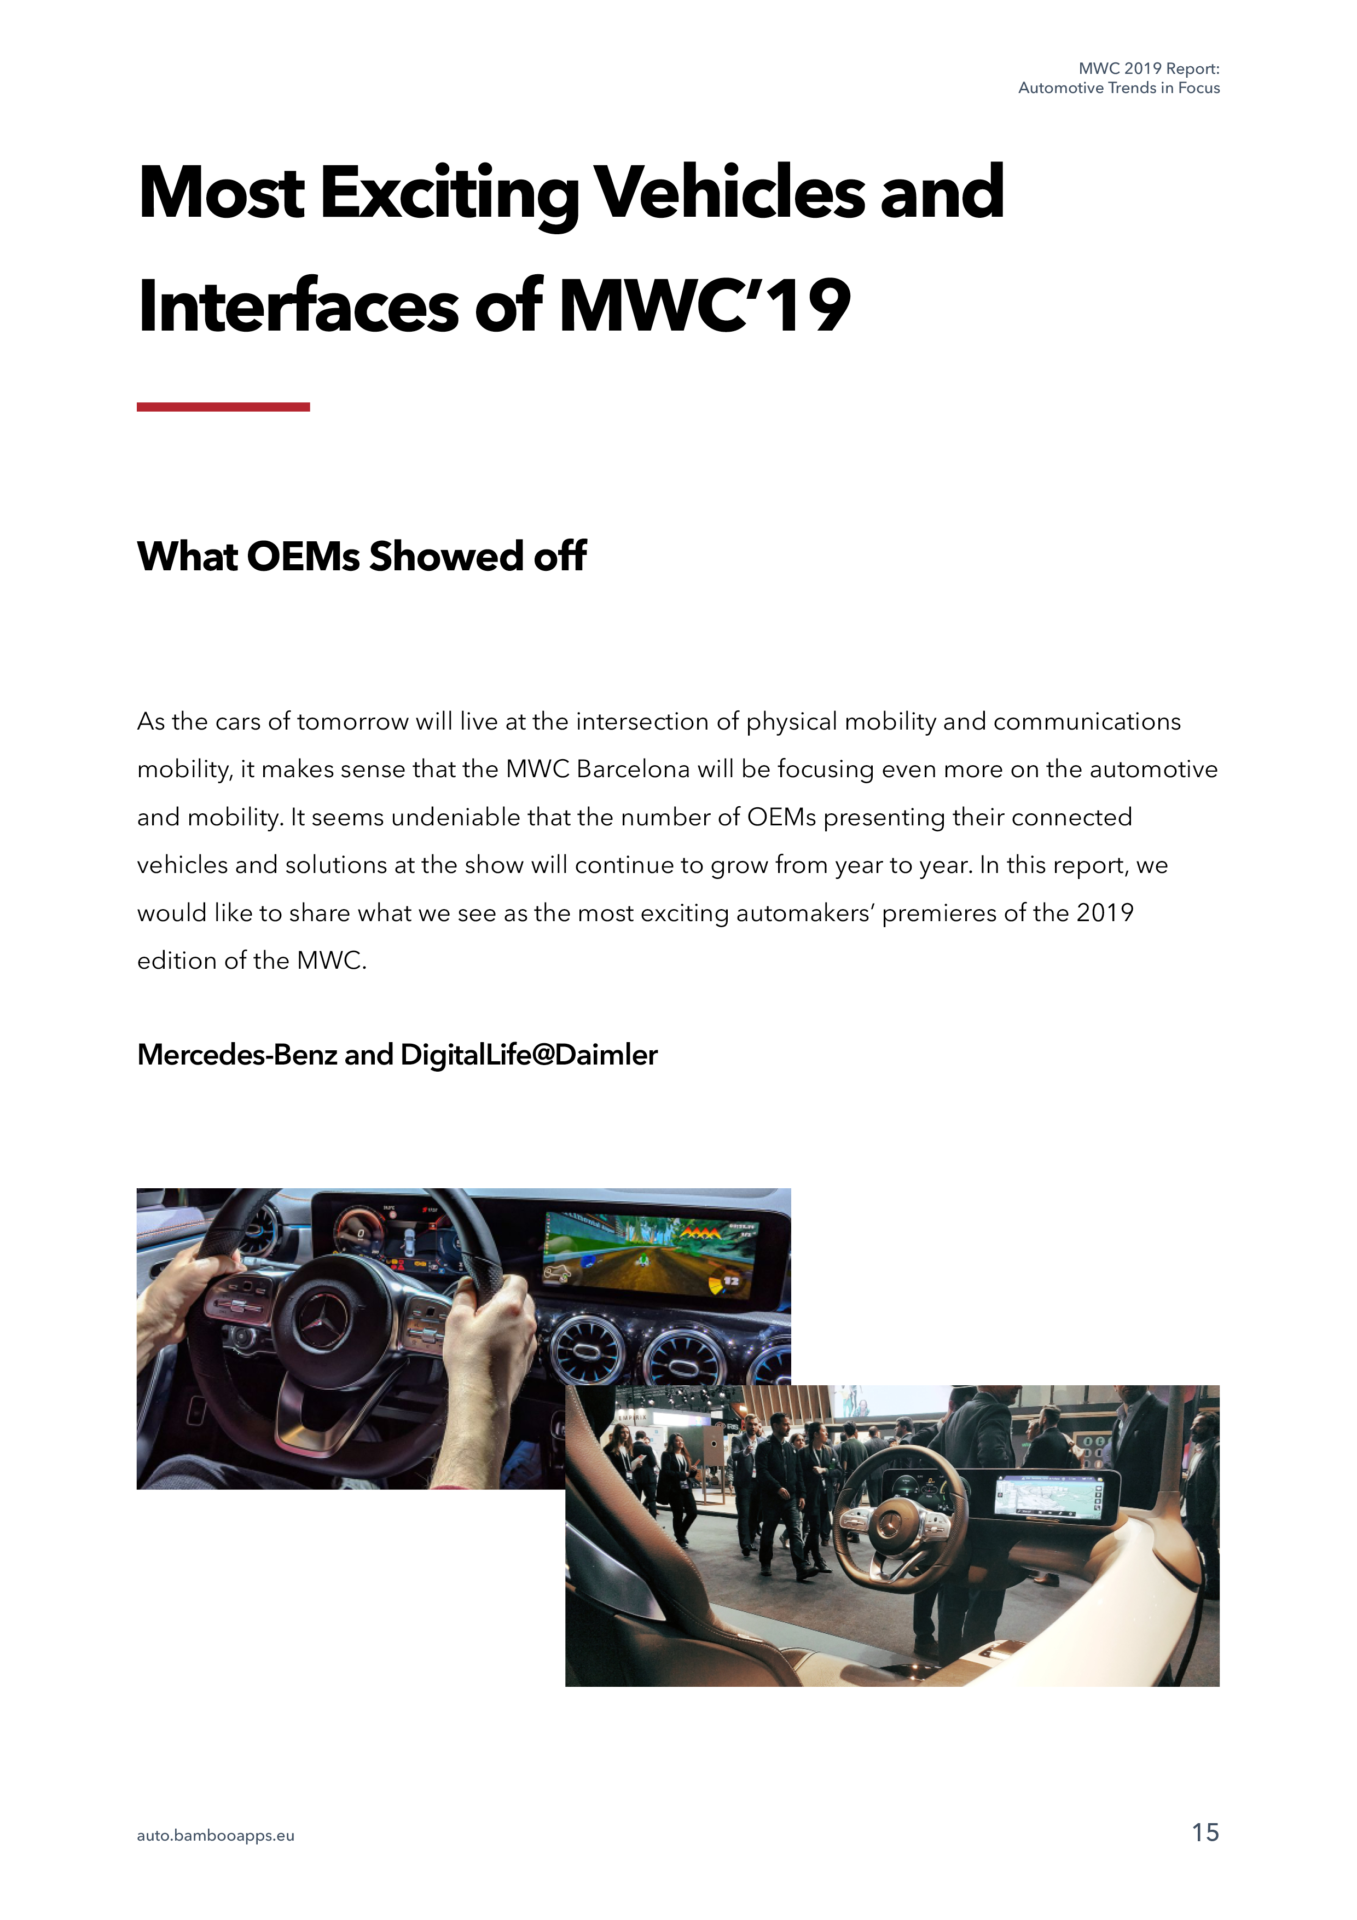 MWC 2019 Report: Automotive Trends in Focus | Page 2